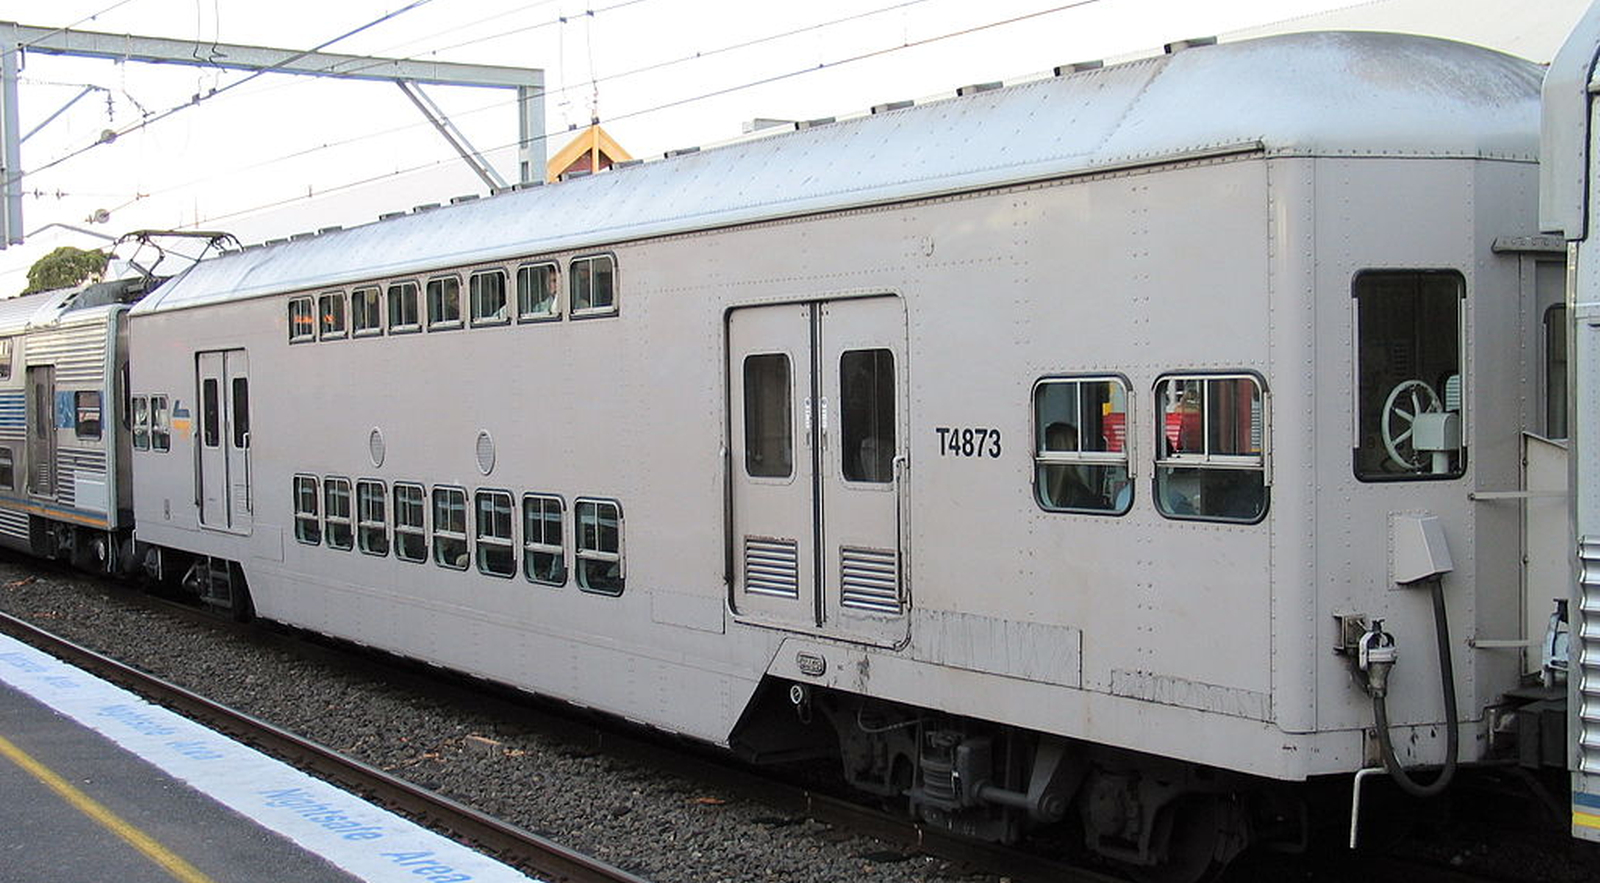 T4873 unpowered carriage in July 2003 in Sydenham